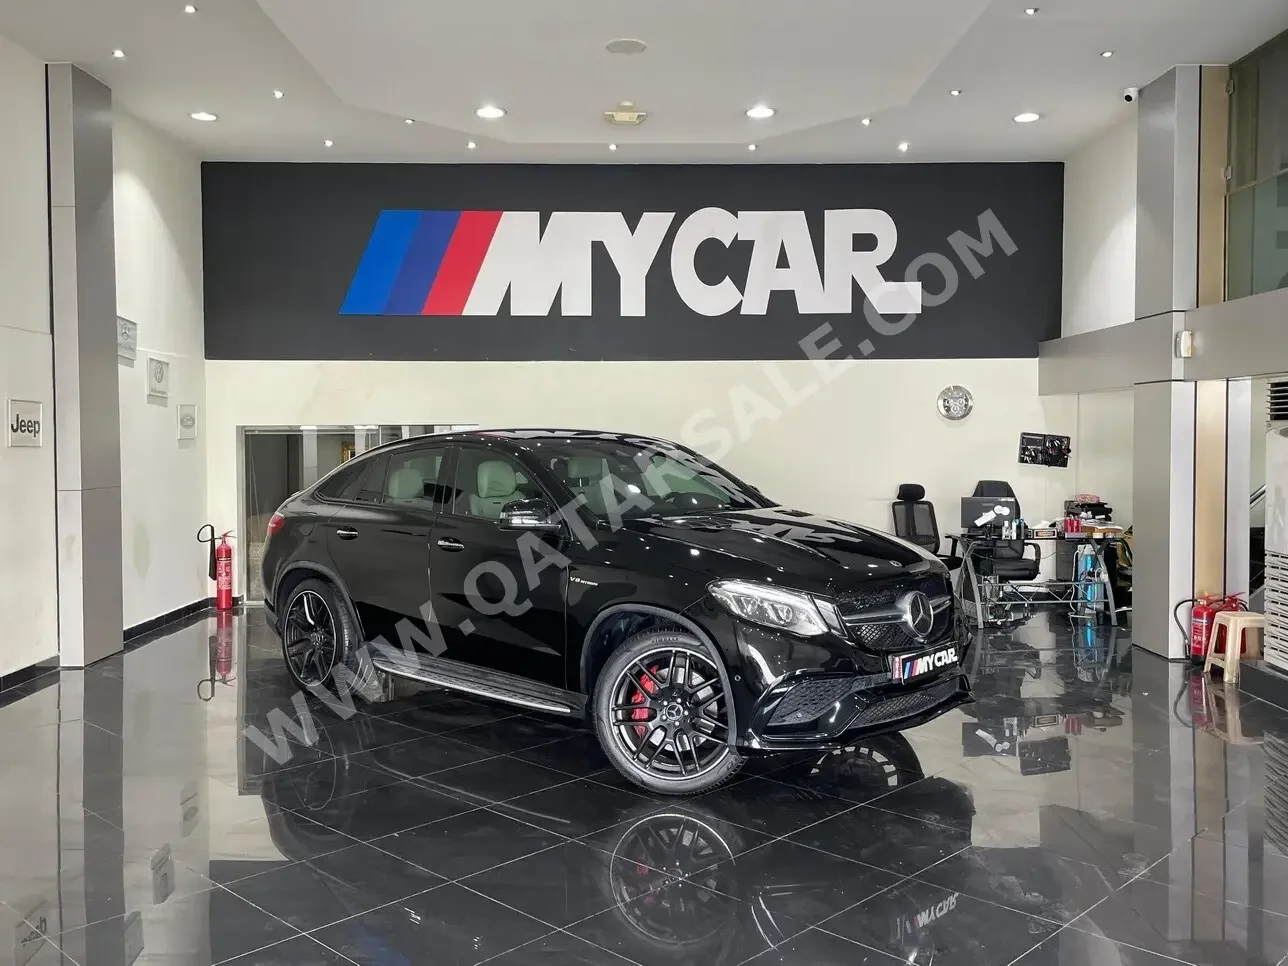 Mercedes-Benz  GLE  63S AMG  2018  Automatic  106,000 Km  8 Cylinder  Four Wheel Drive (4WD)  SUV  Black